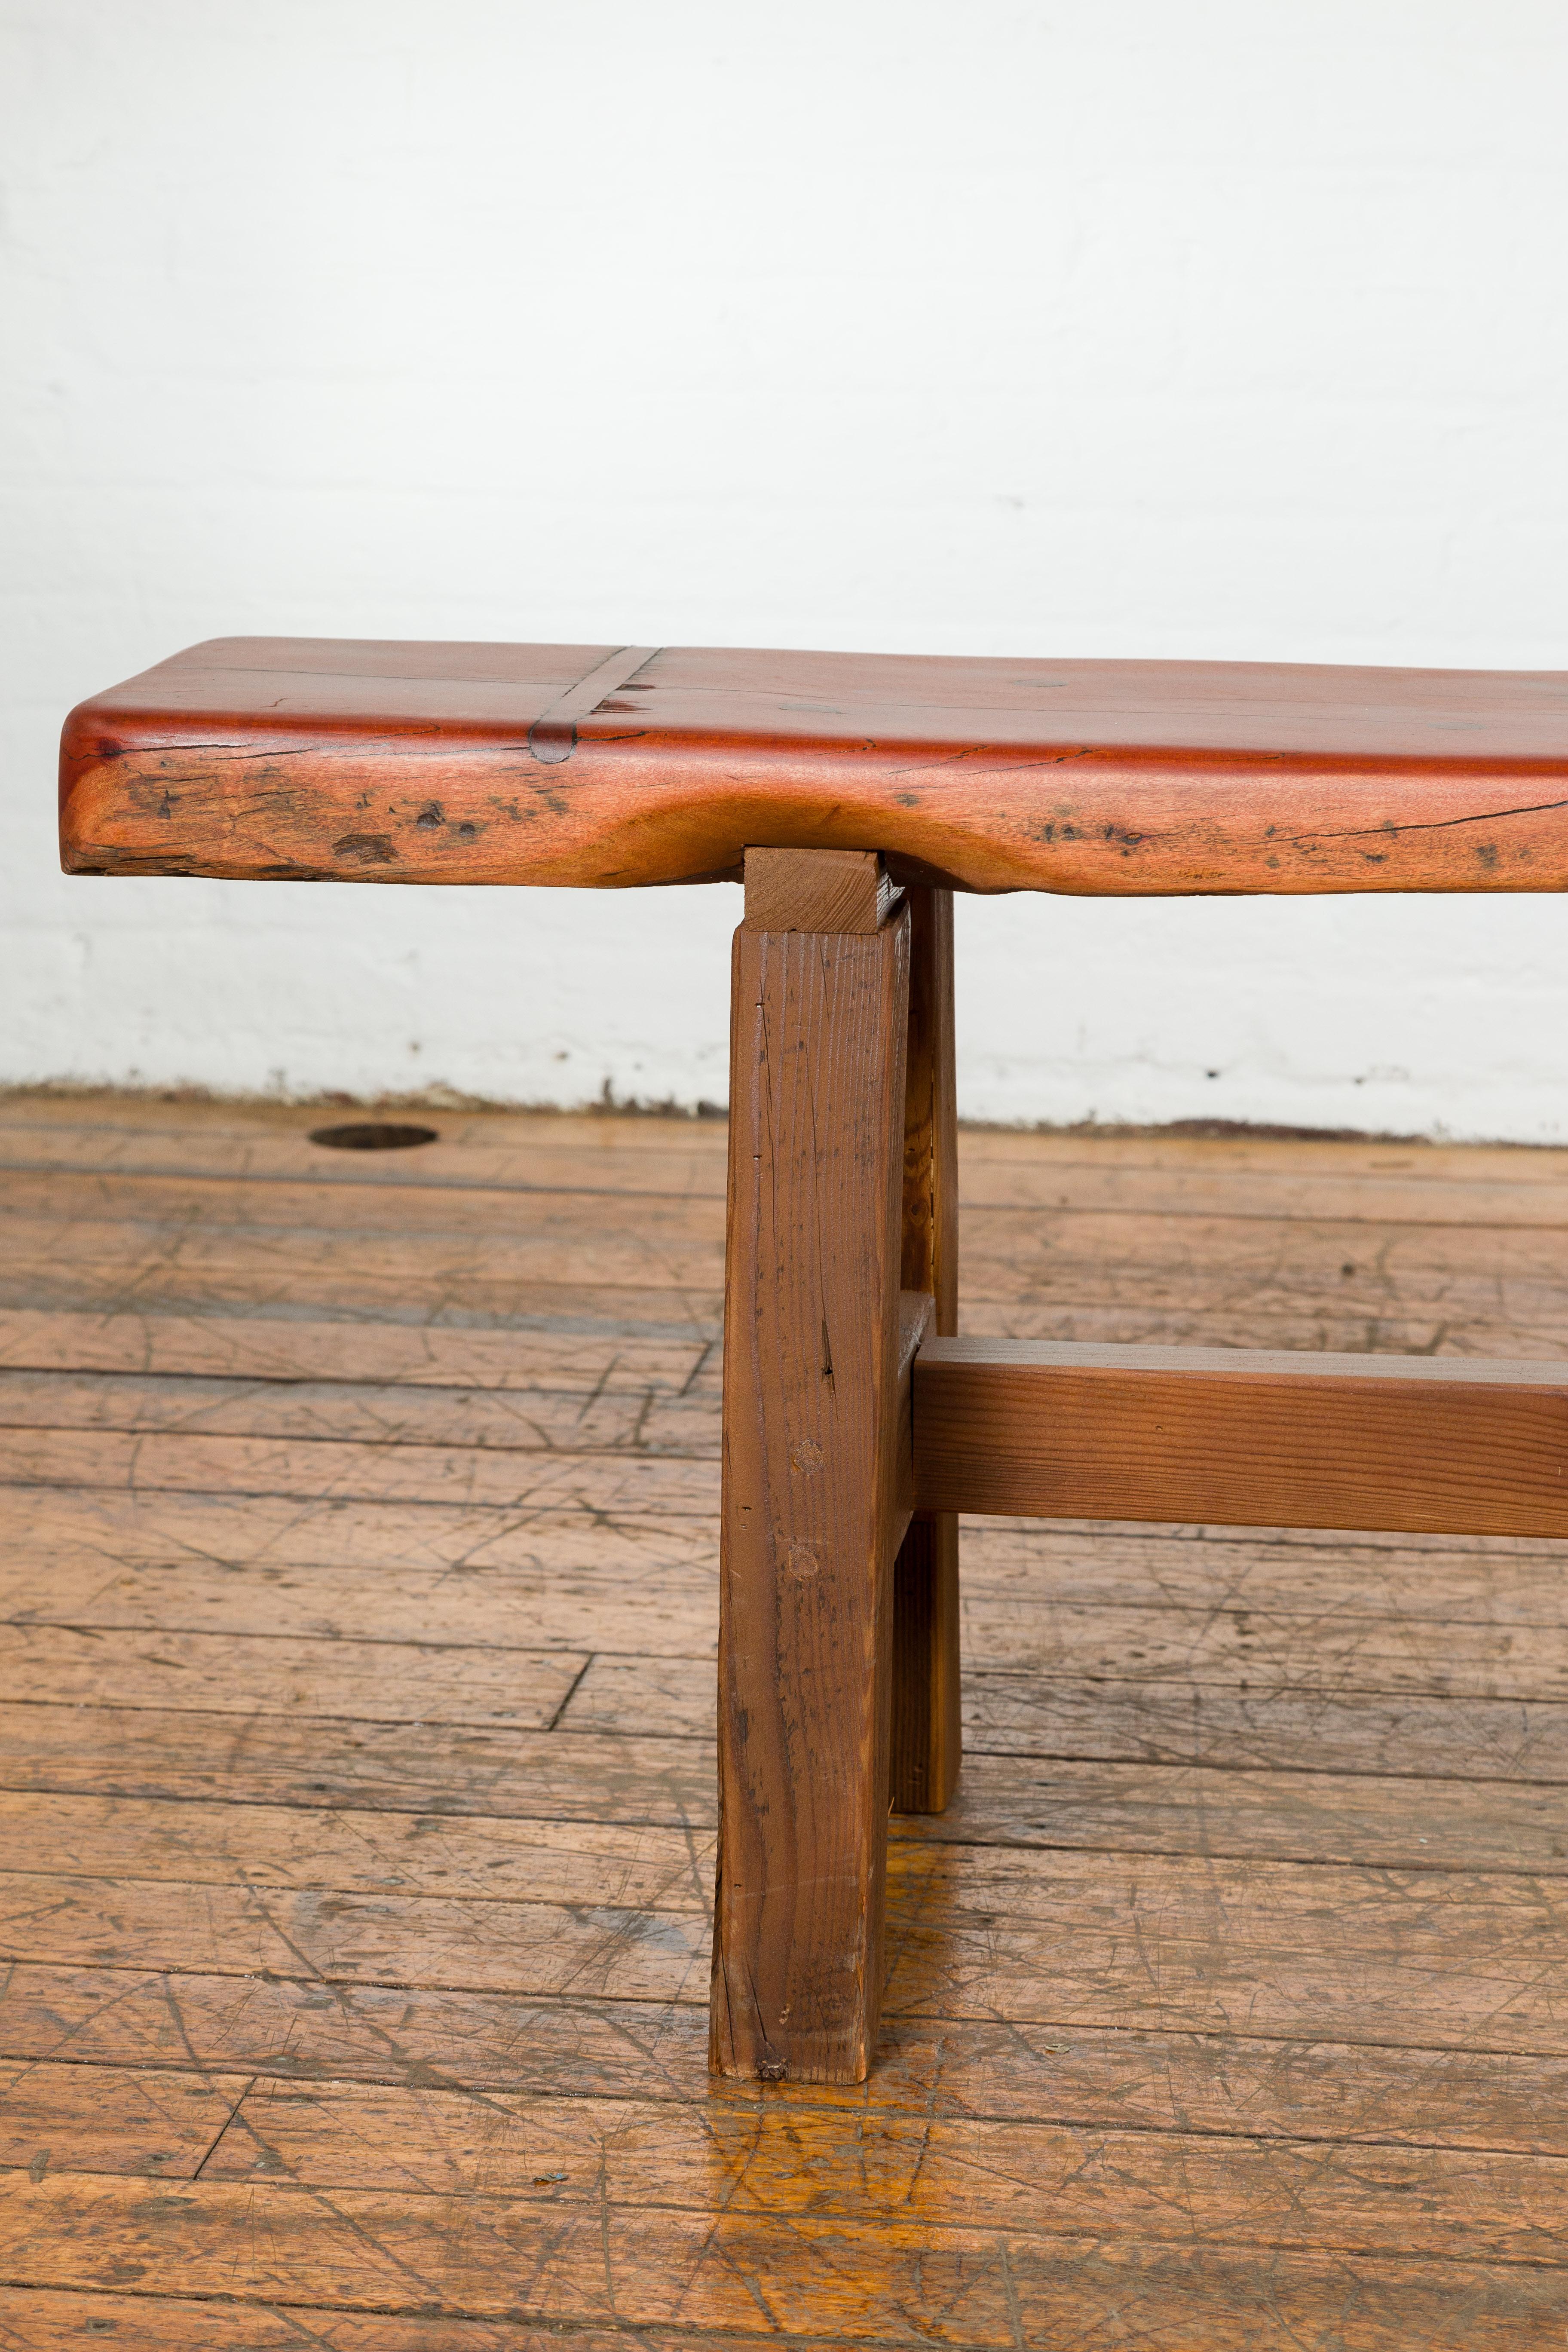 Country Mingei Style Rustic A-Frame Wooden Bench Made of Railroad Ties with Stretcher For Sale